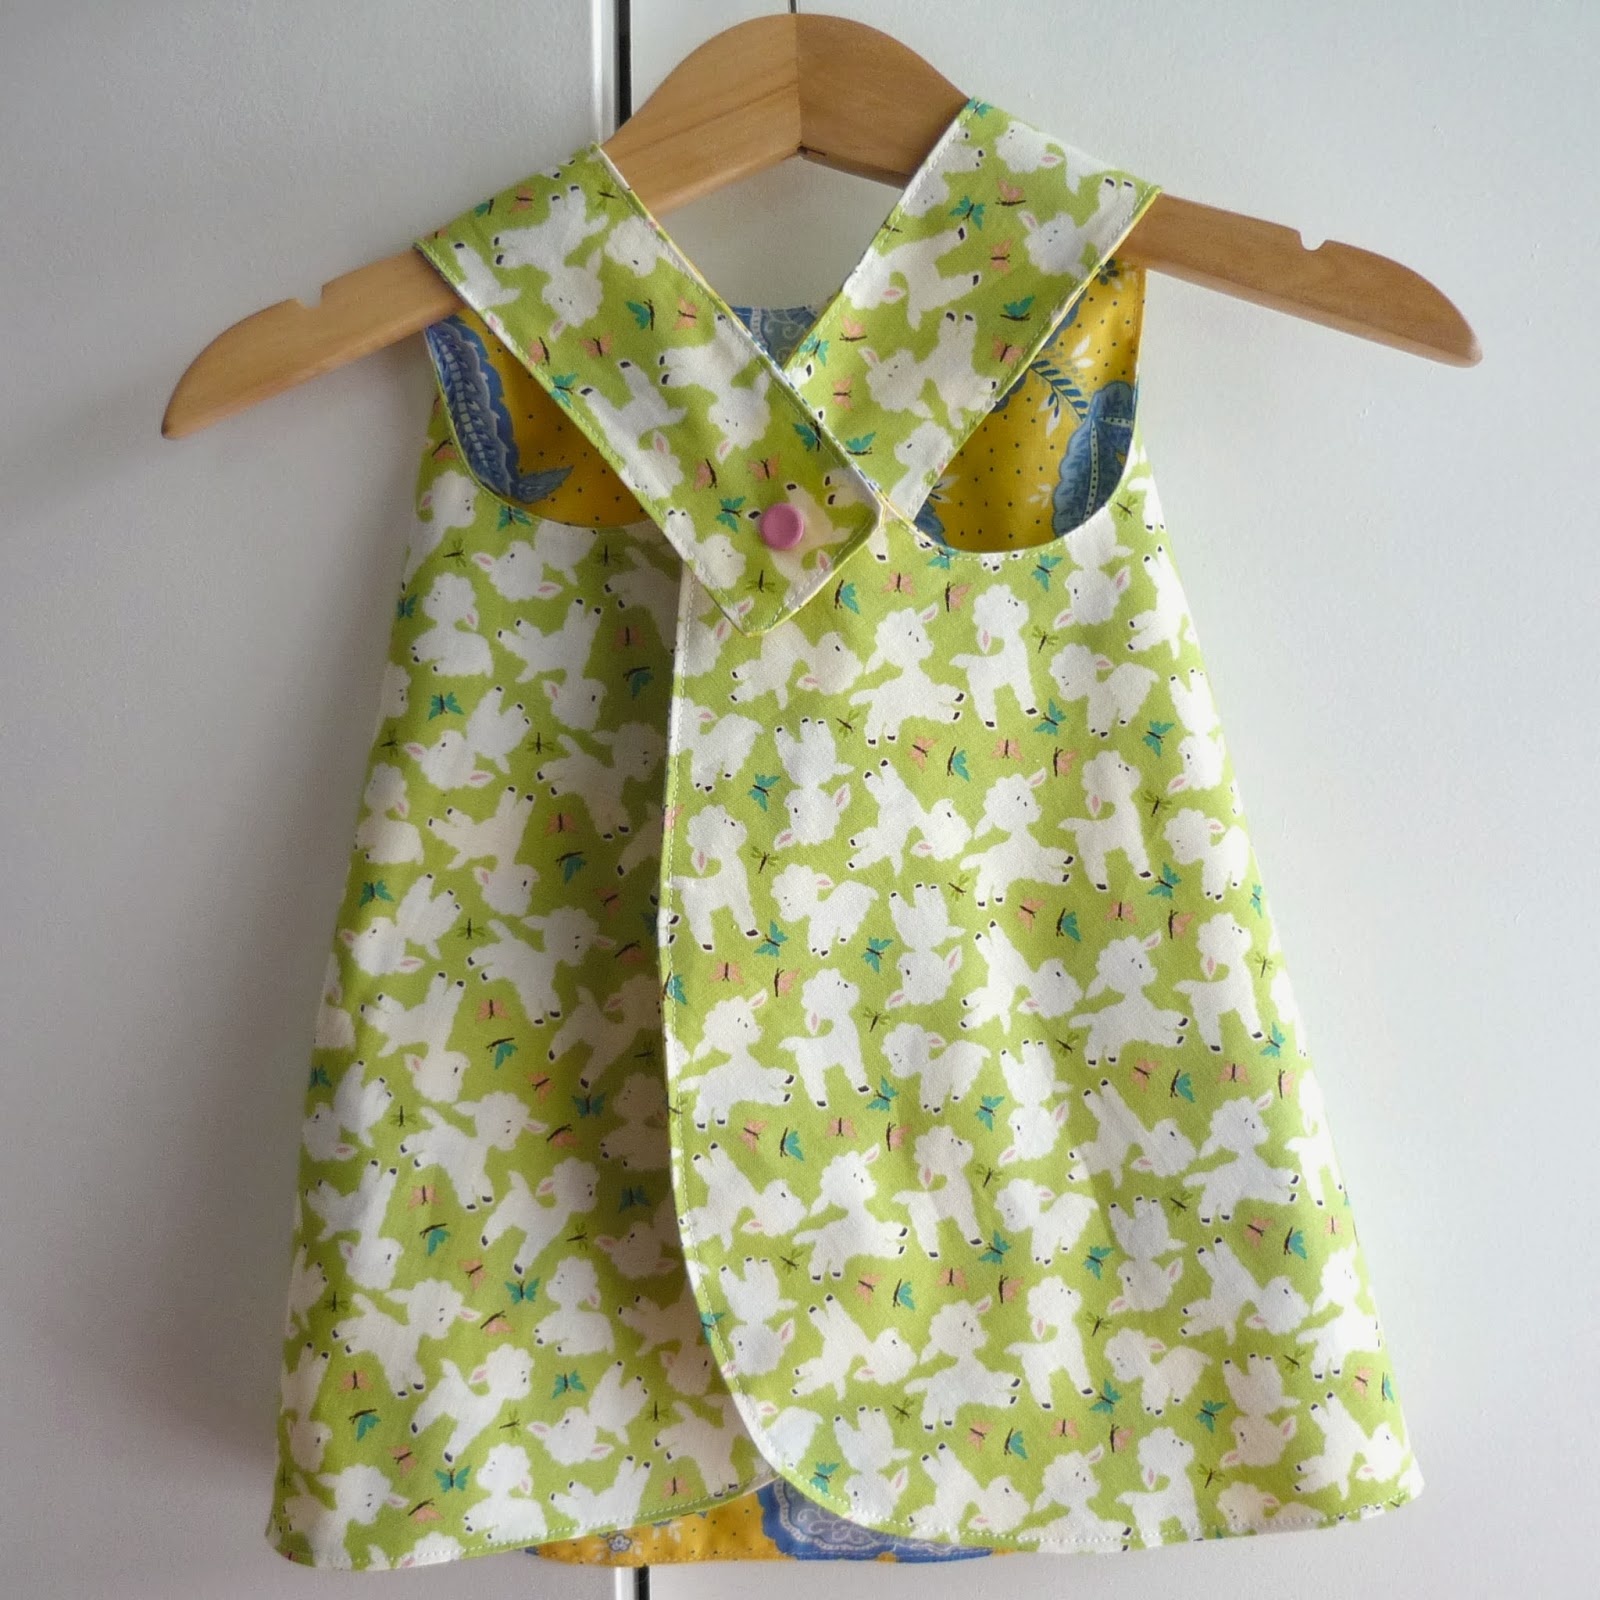 While Henry Naps: Baby Crossover Pinafore and Bloomers